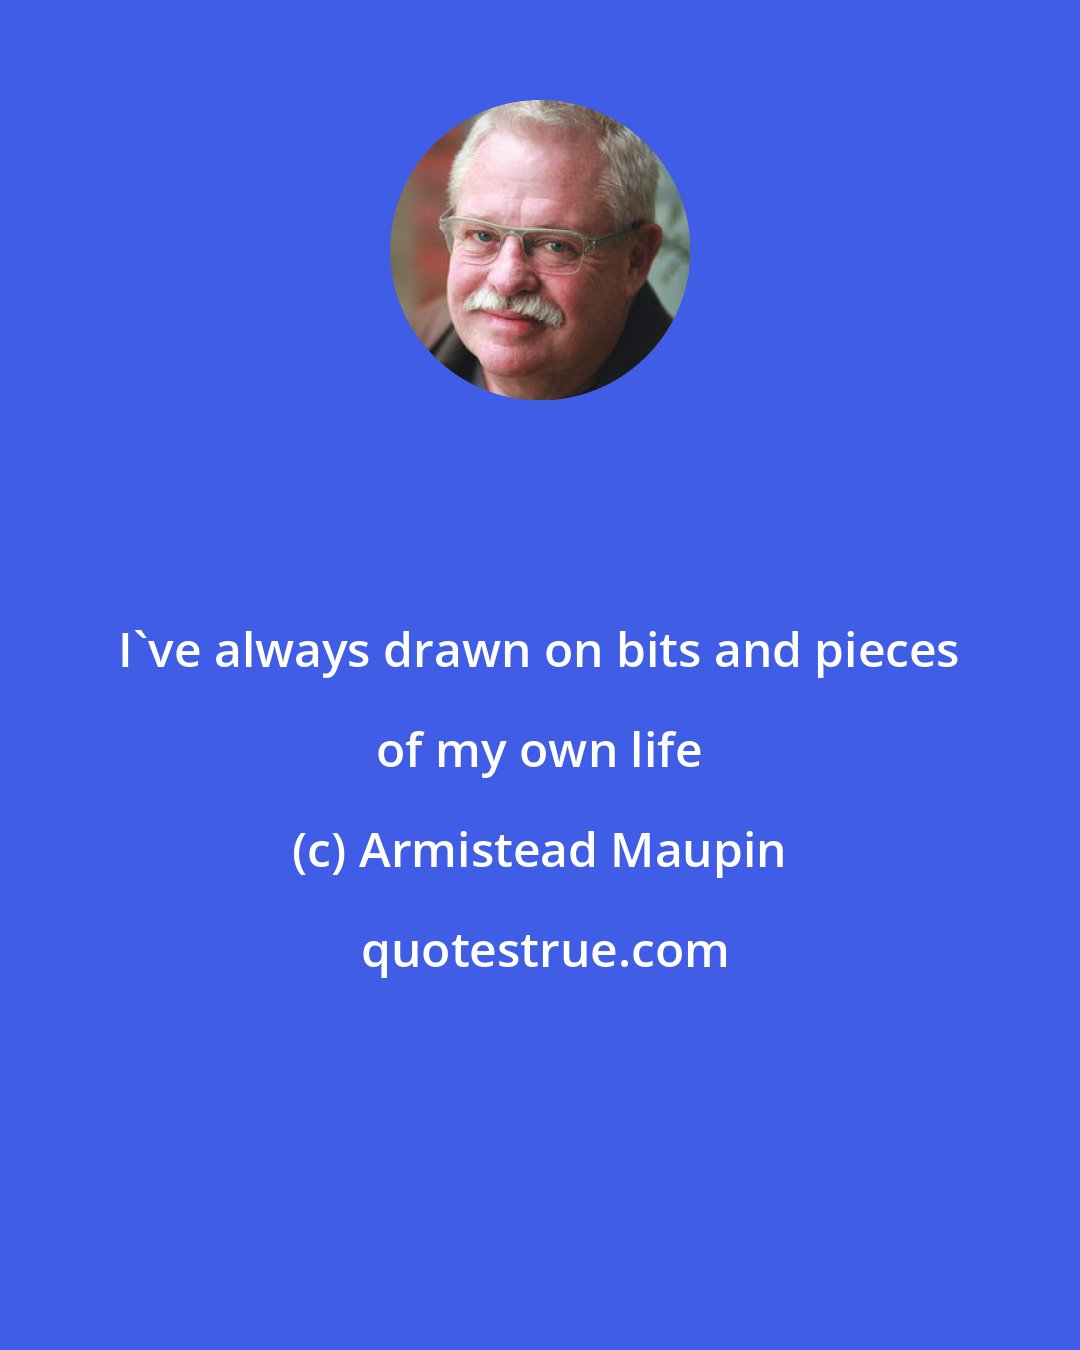 Armistead Maupin: I've always drawn on bits and pieces of my own life